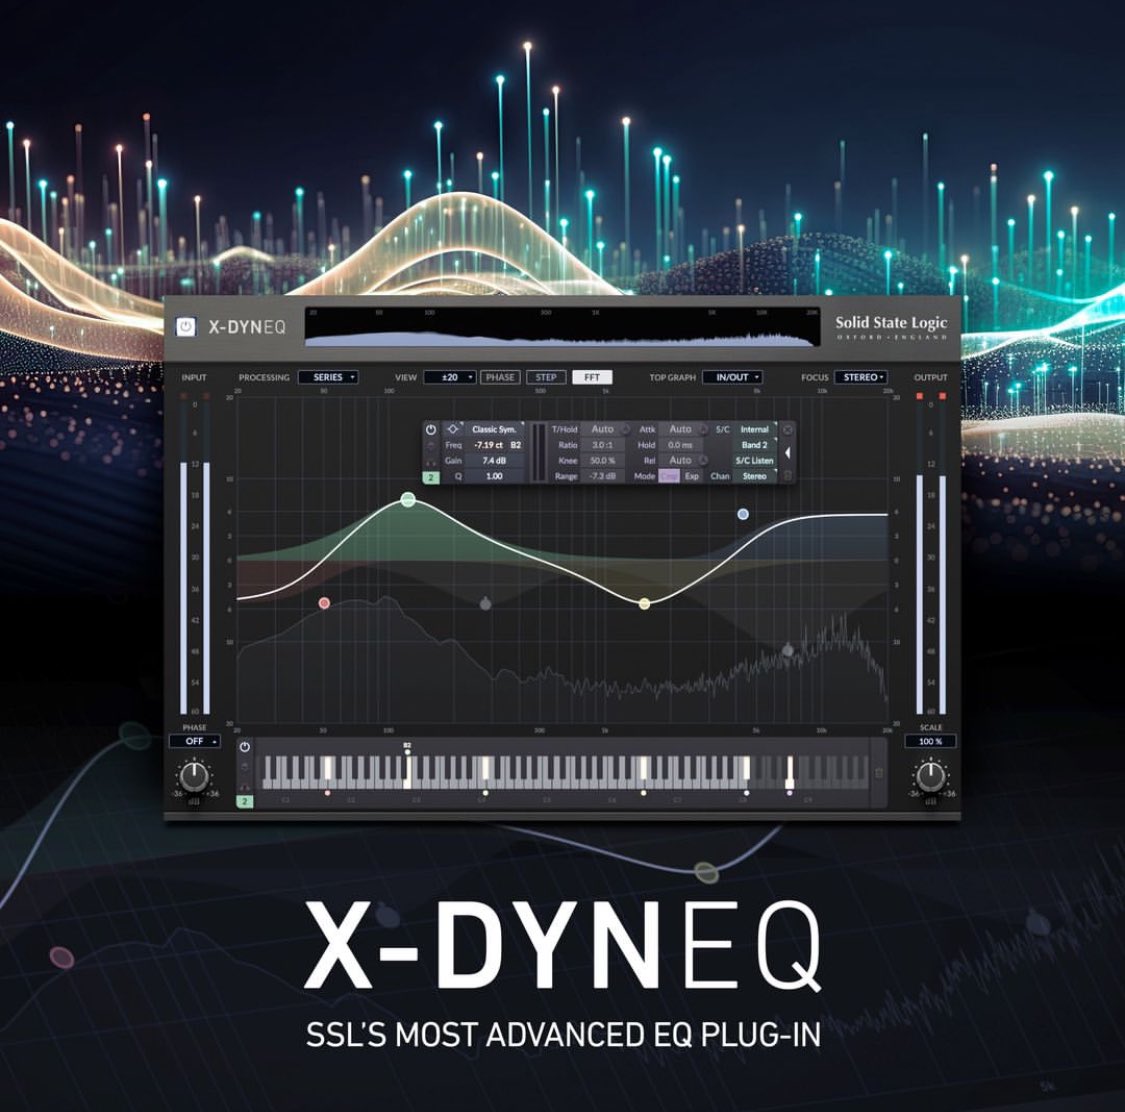 ⚙️ SSL X-DynEQ Nah this is wild now… • Piano Roll View • 24 band dynamic EQ • Per Band dynamic sidechaining And more. @natemixing